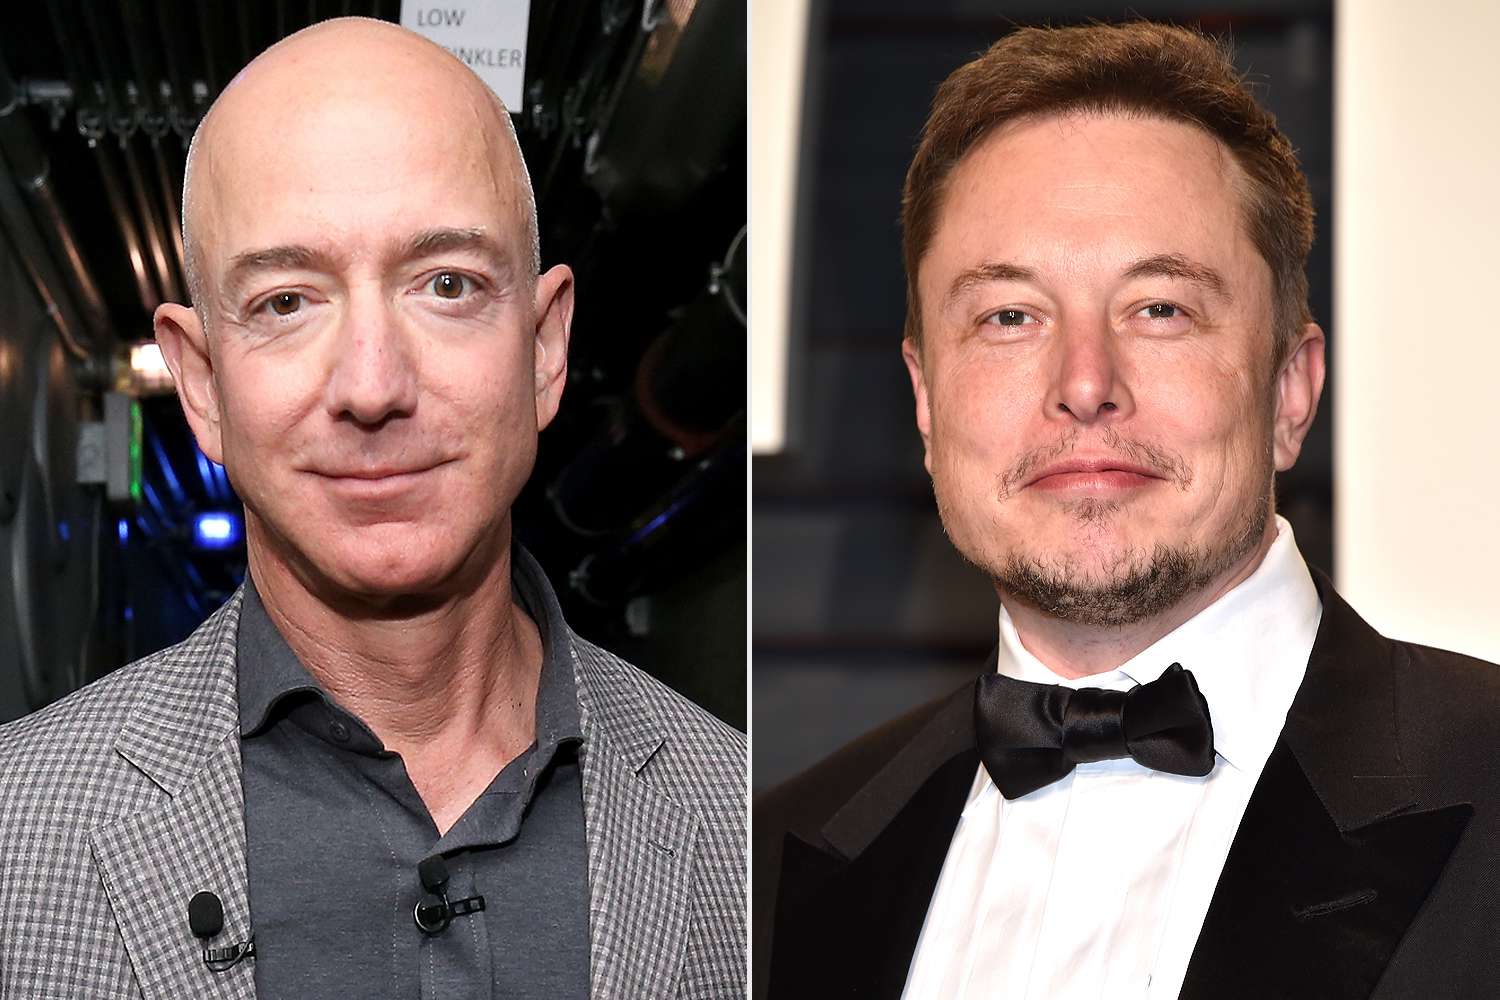 Jeff Bezos’s Net Worth Exceeds $200 Billion, Reclaiming Elon Musk’s Second-Richest Title in the World